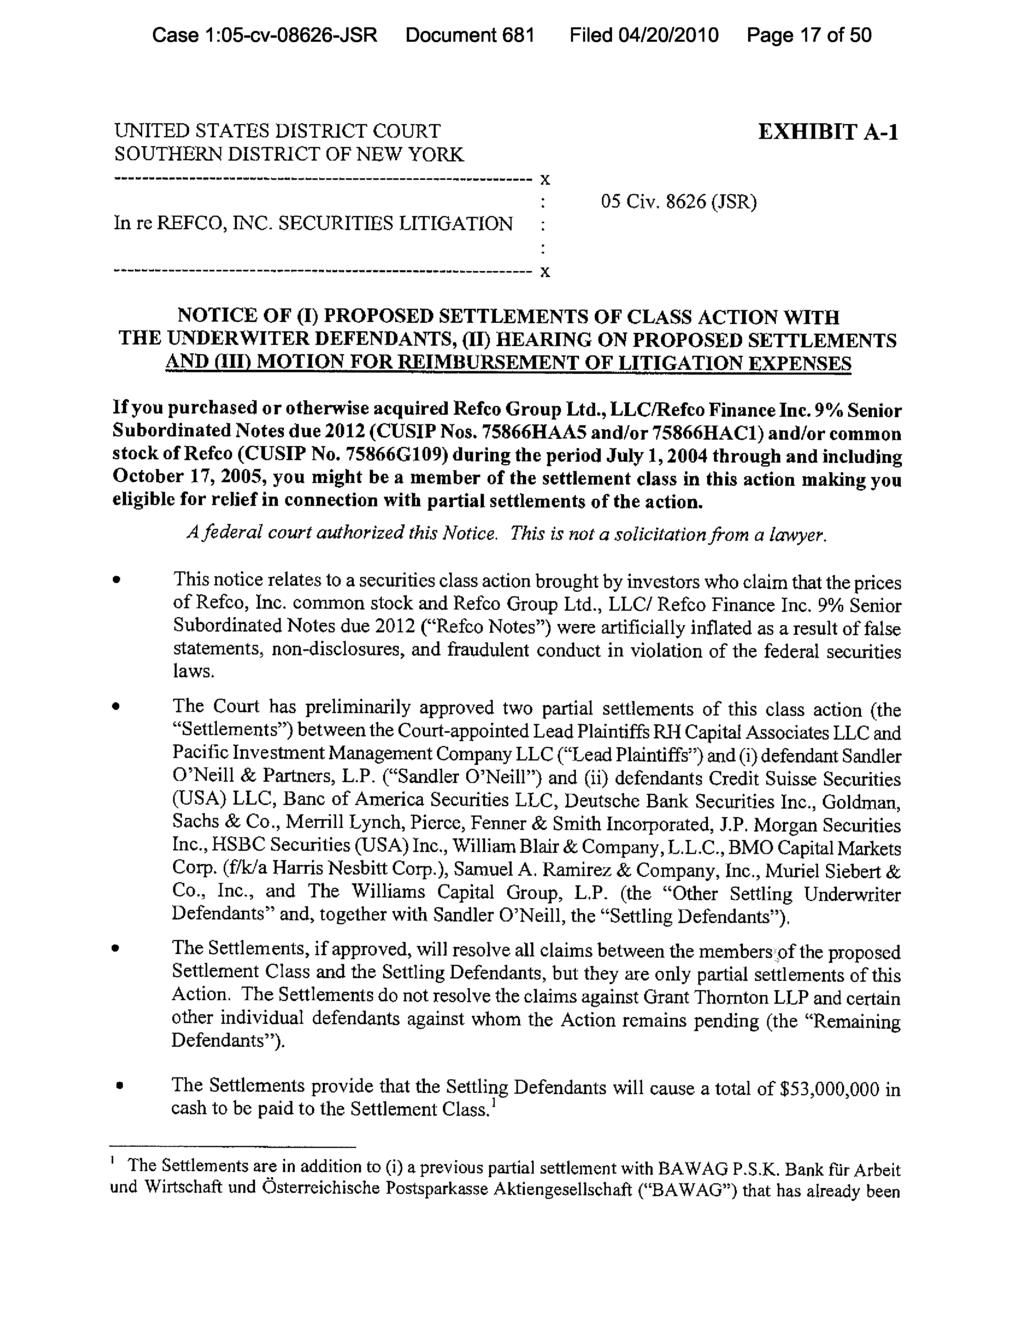 Case 1:05-cv-08626-JSR Document 681 Filed 04/20/2010 Page 17 of 50 UNITED STATES DISTRICT COURT EXHIBIT A-1 SOUTHERN DISTRICT OF NEW YORK x 05 Civ. 8626 (JSR) In re REFCO, INC.